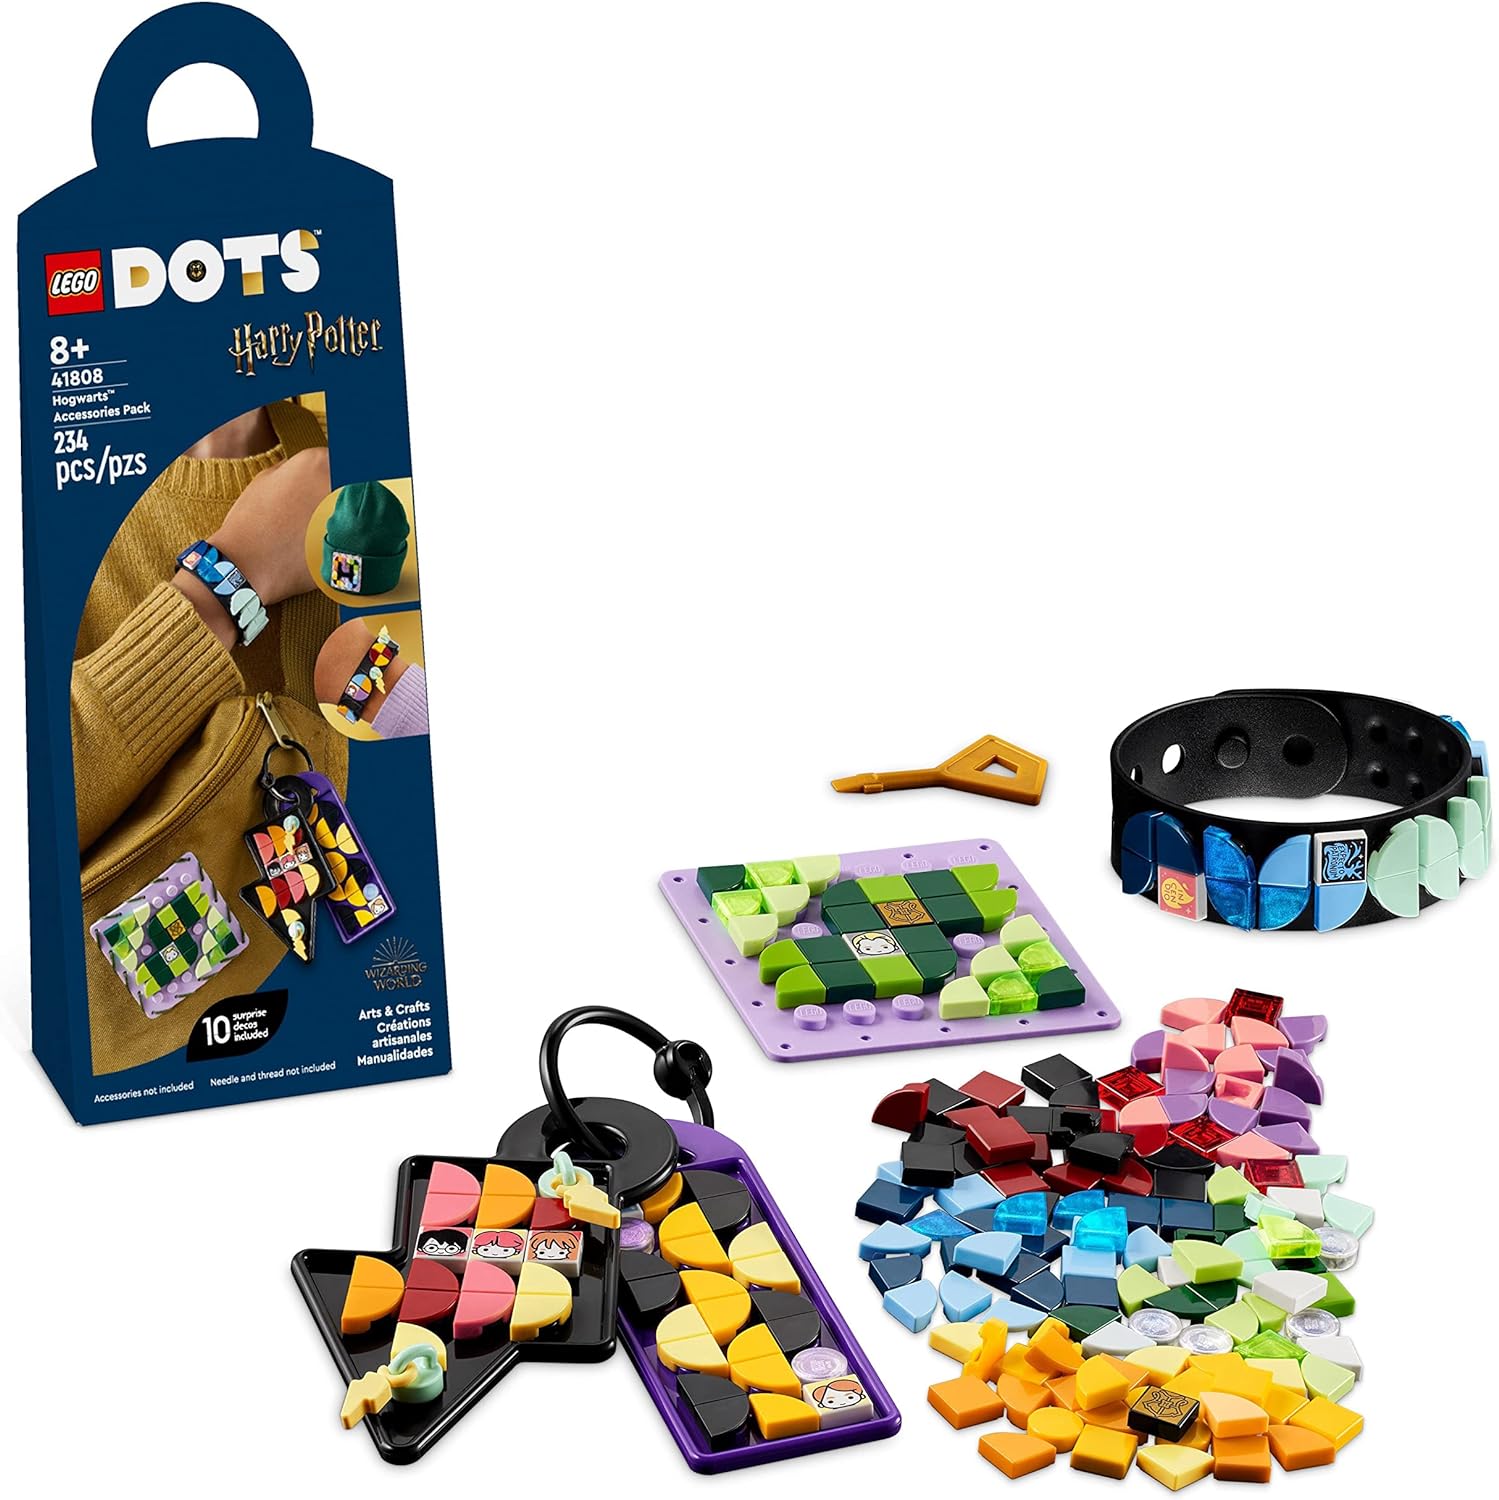 Lego 41808 DOTS Hogwarts Accessories Pack